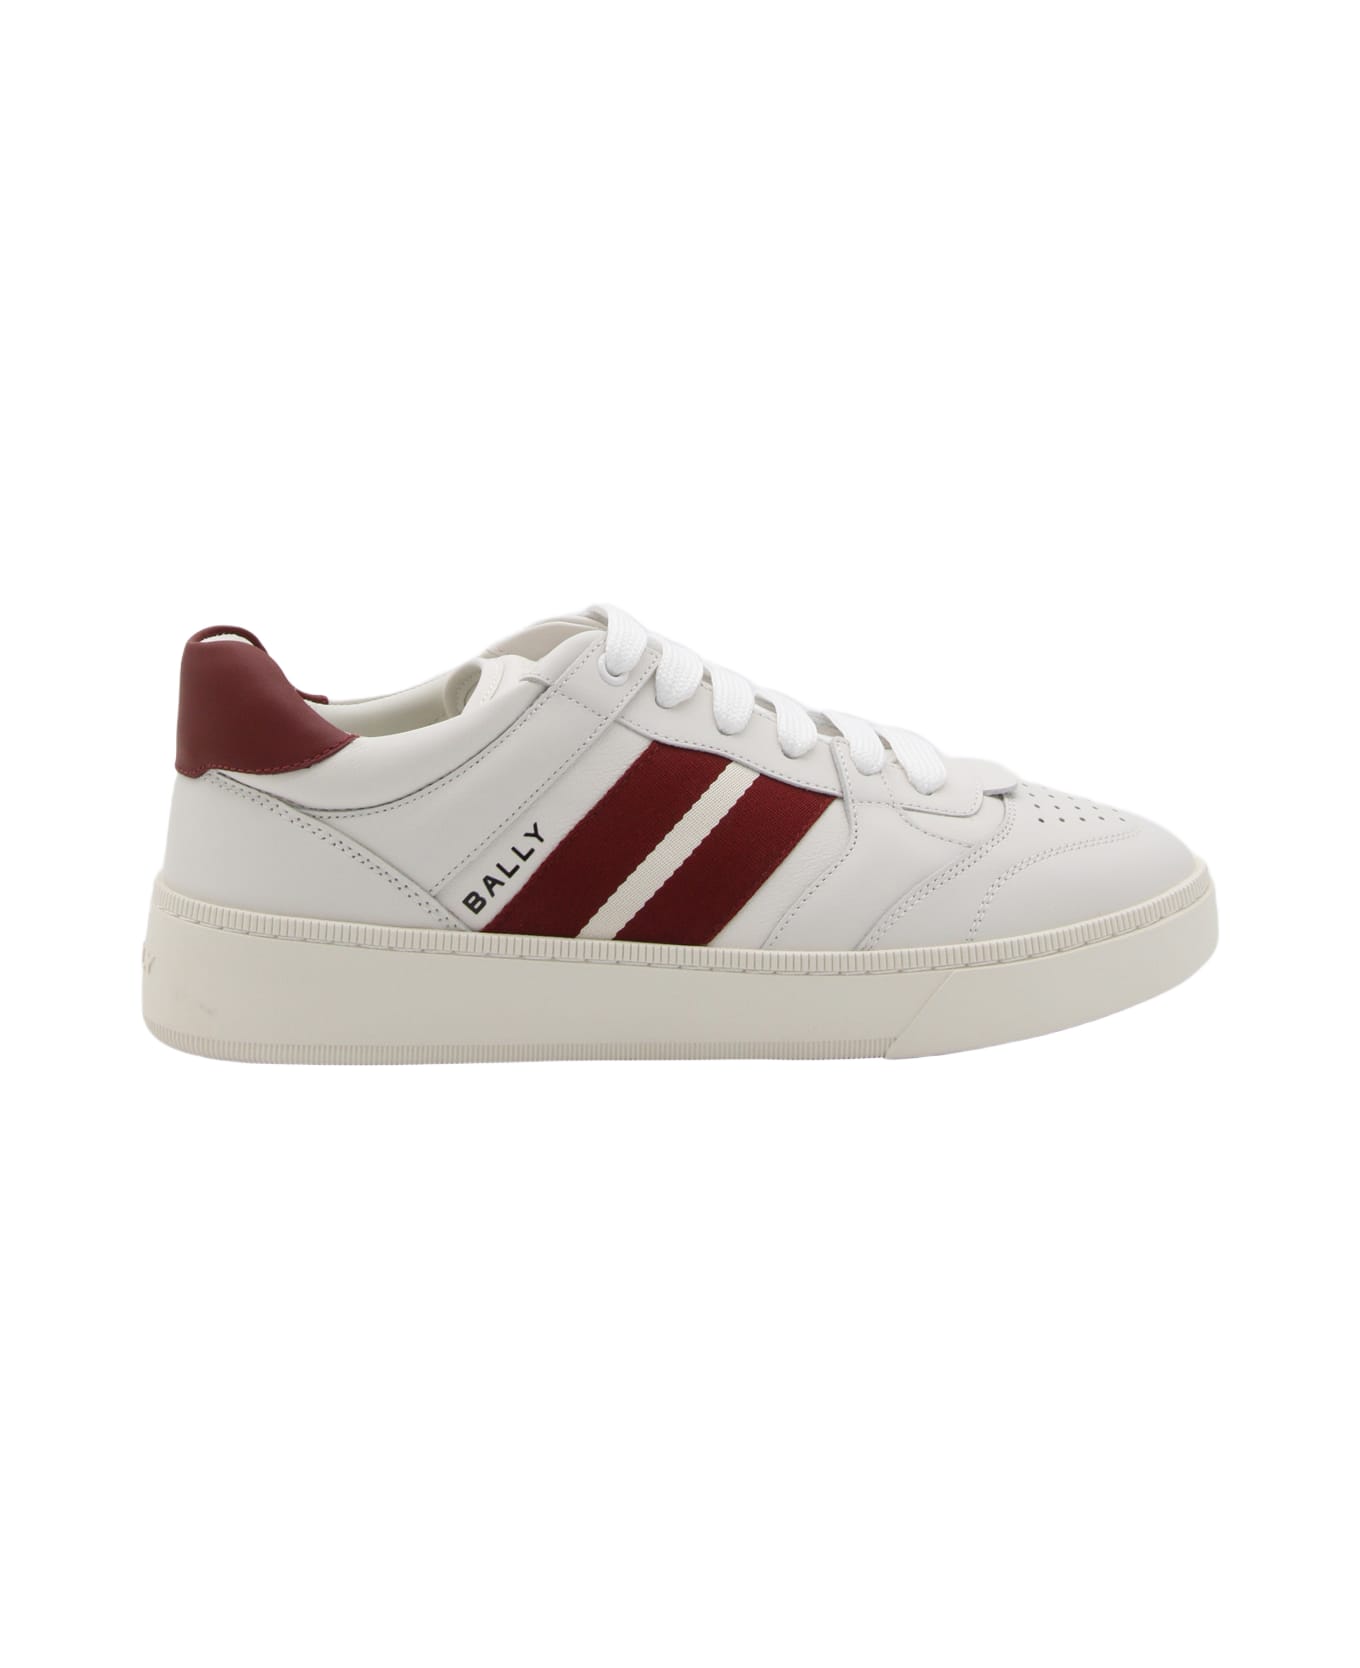 Bally White And Red Leather Sneakers - WHITE/BALLYRED